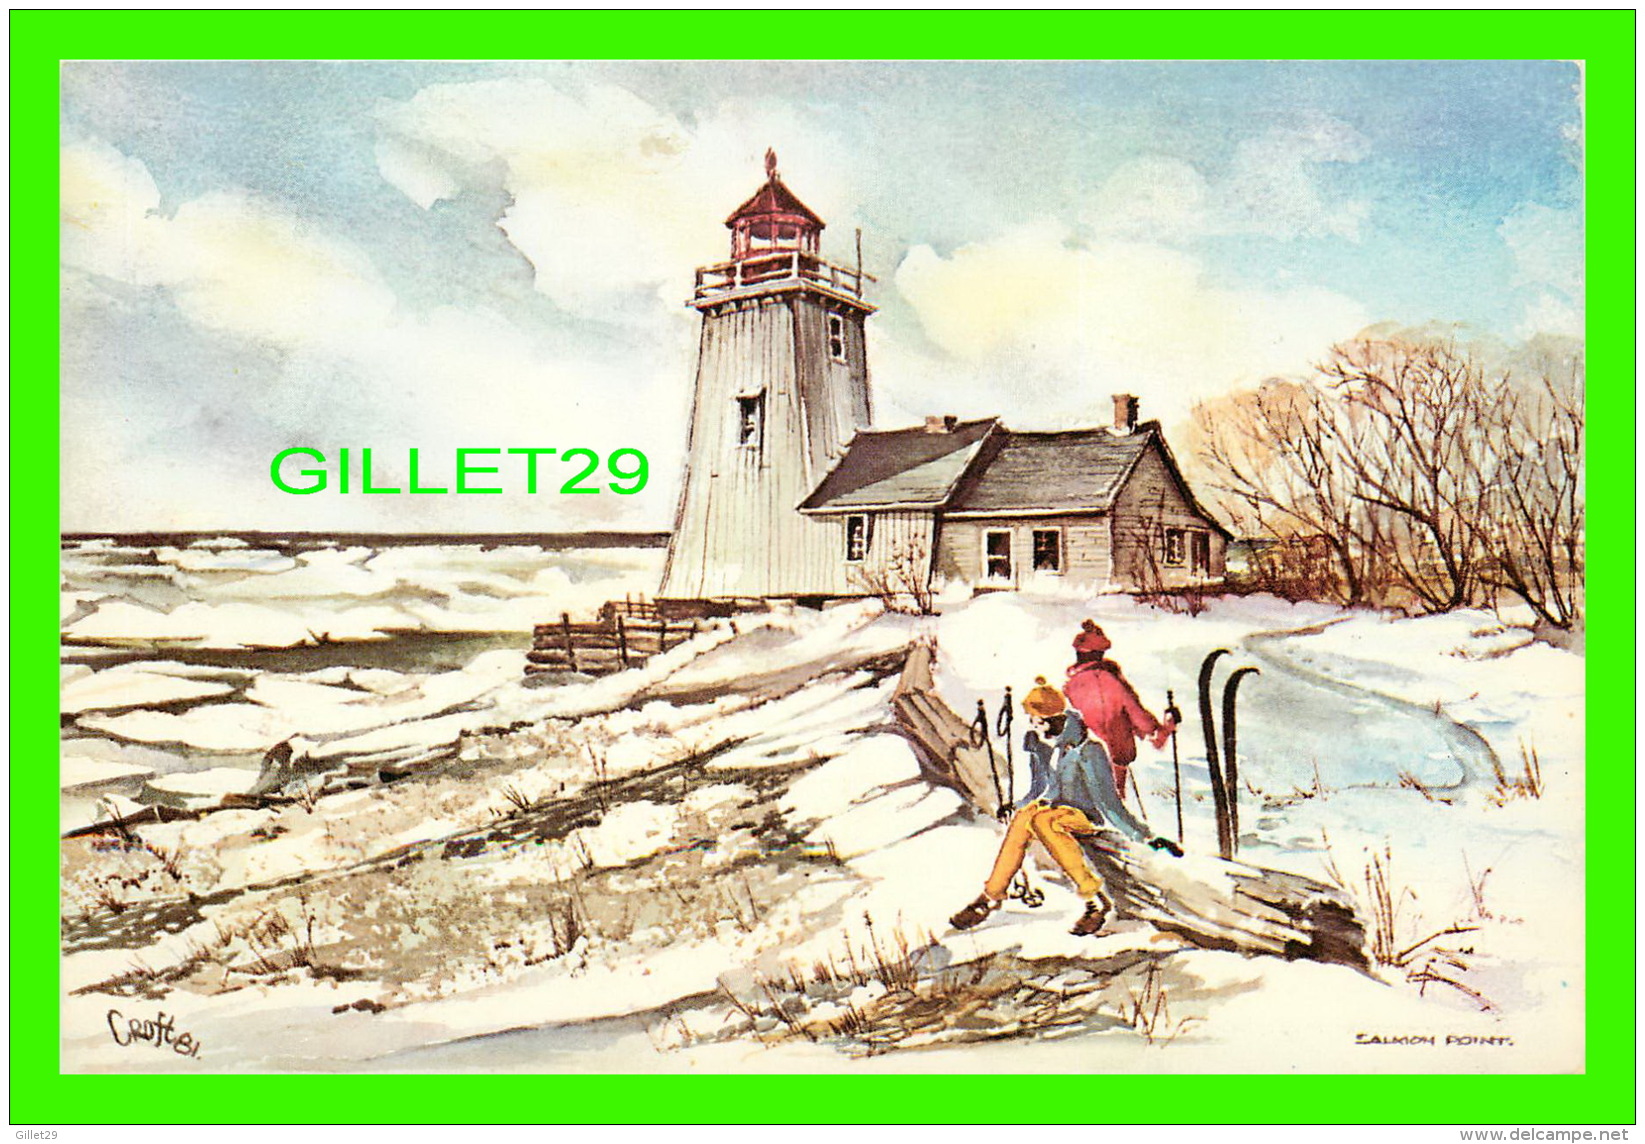 PHARES - LIGHTHOUSE - SALMON OR WICKED POINT LIGHTHOUSE WINTER, PRINCE EDWARD COUNTY - WATERCOLOUR BY RAYMOND C. WOODS - - Phares